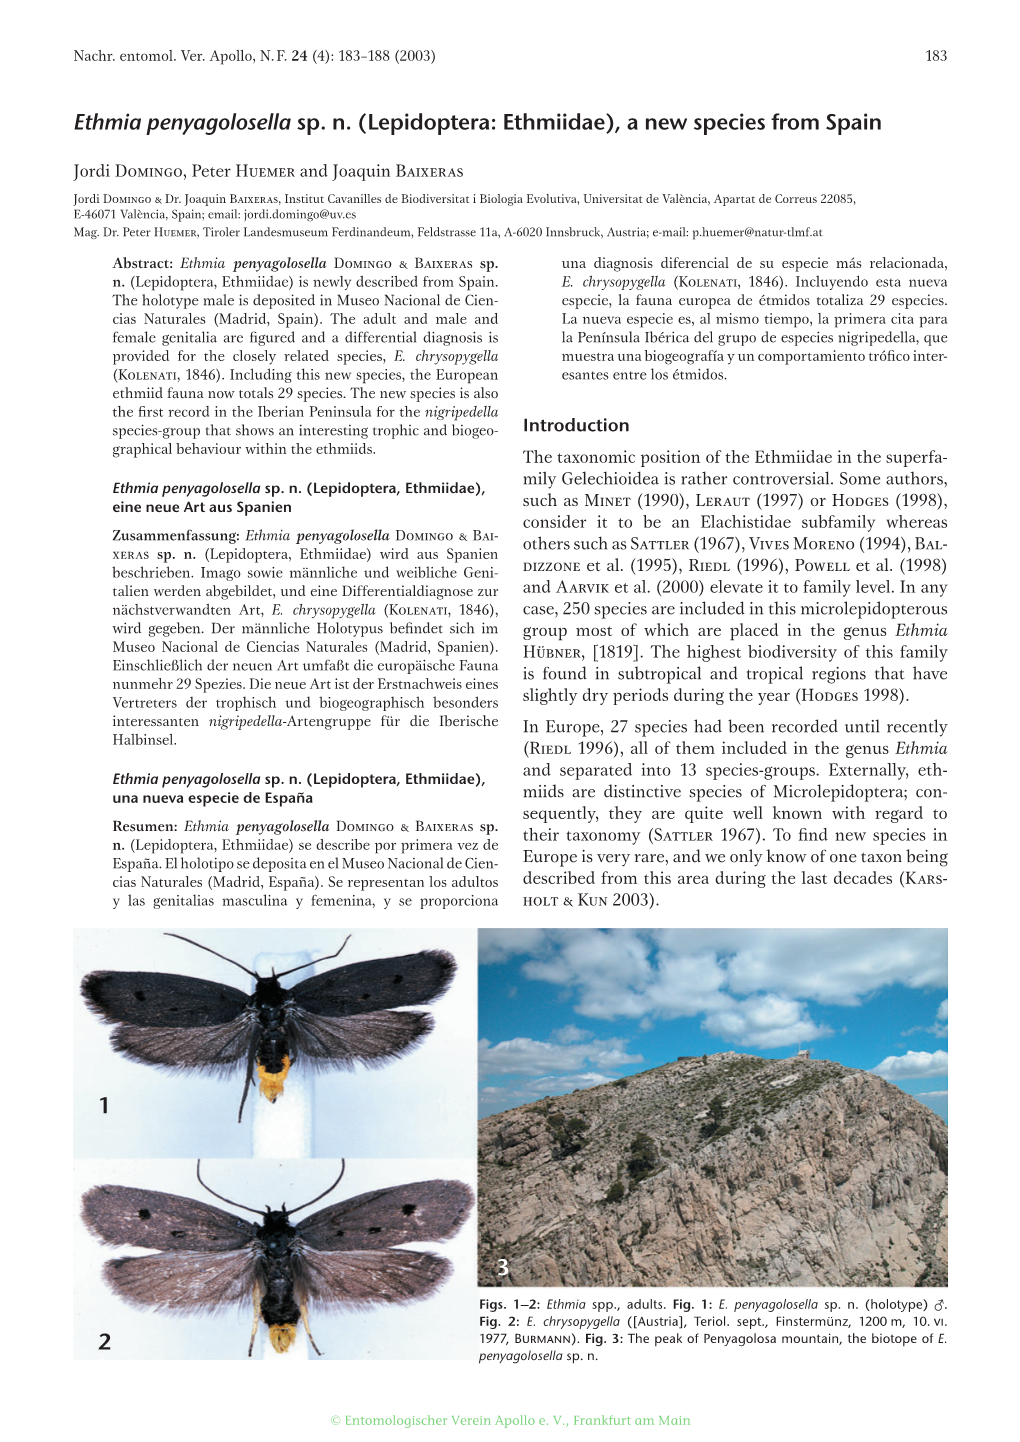 Ethmia Penyagolosella Sp. N. (Lepidoptera: Ethmiidae), a New Species from Spain